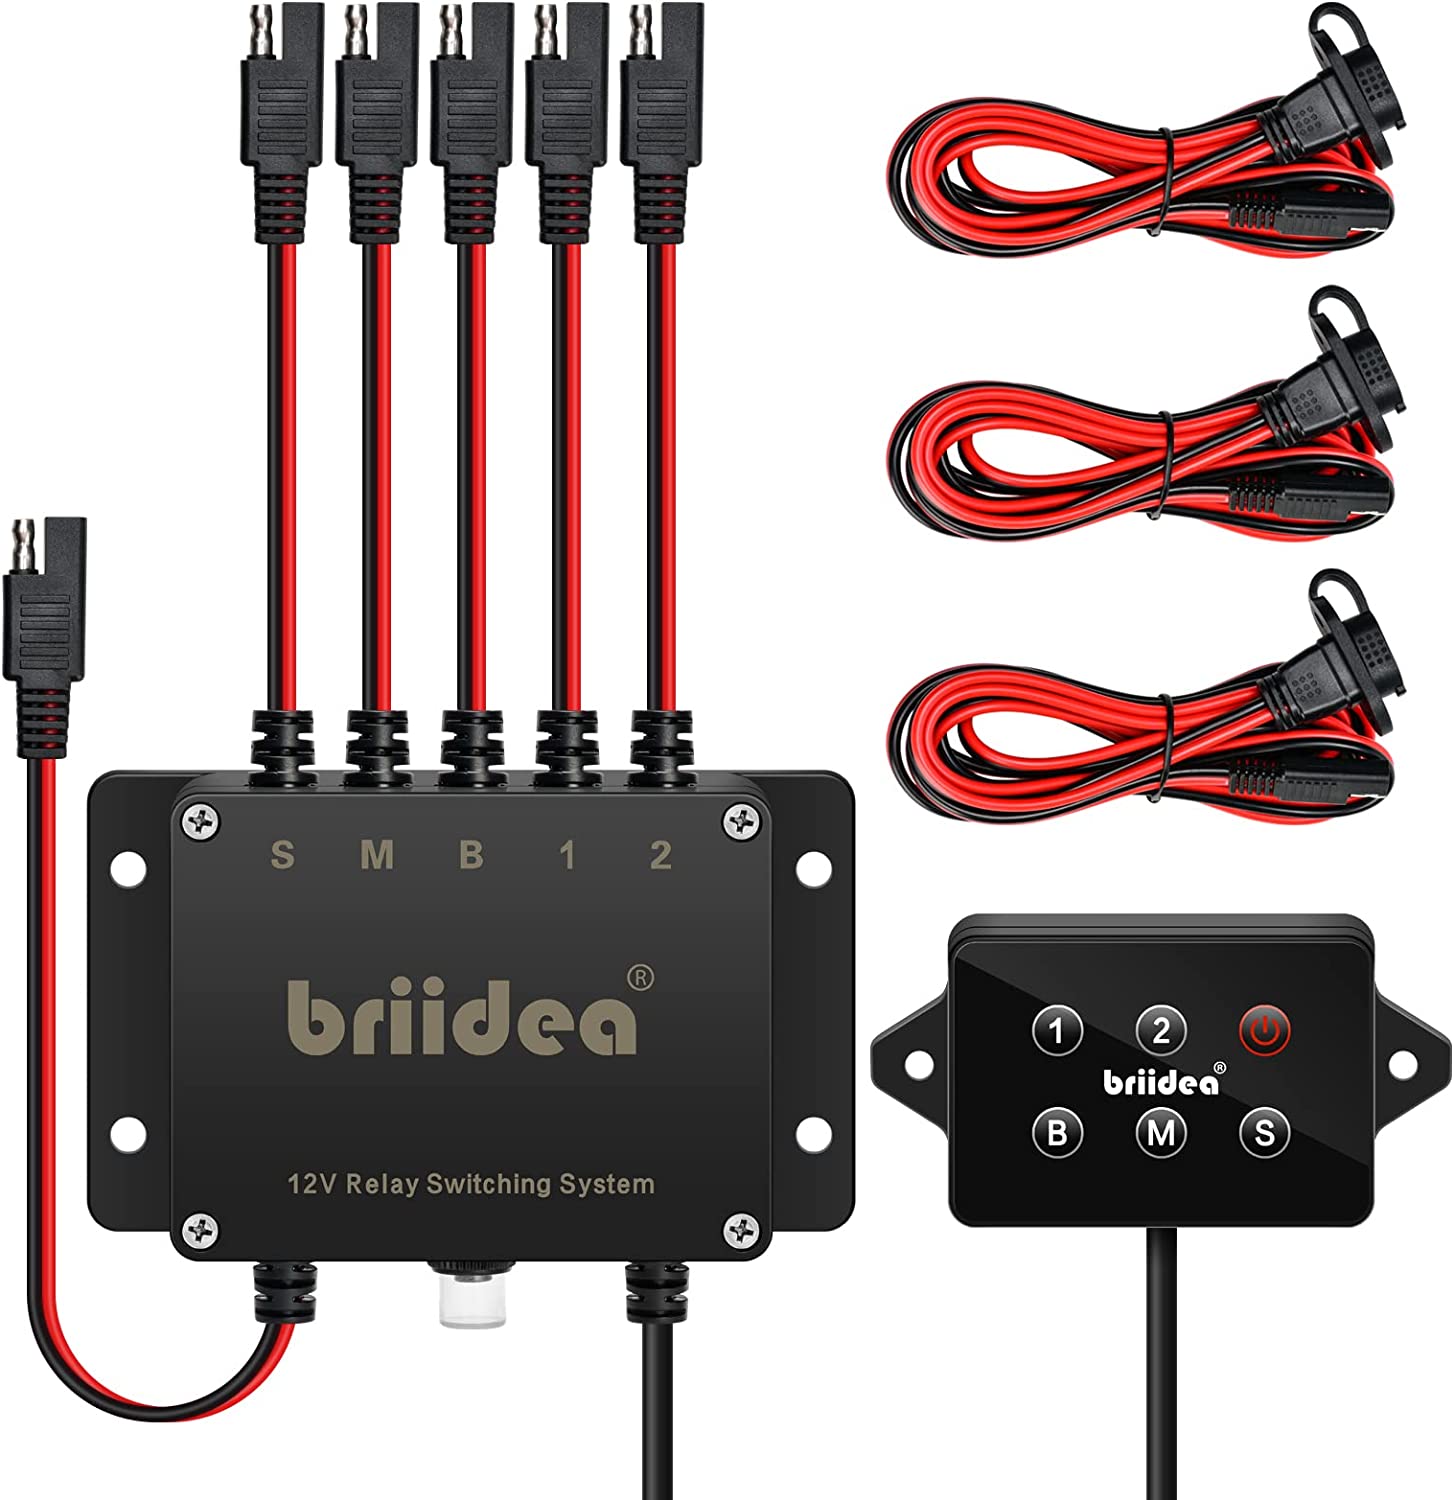 Yak Power System, Briidea Plug-ANG-Play SAE Power Switching System, Waterproof IP67, Suitable for Ships Kayaks ATV or UTV